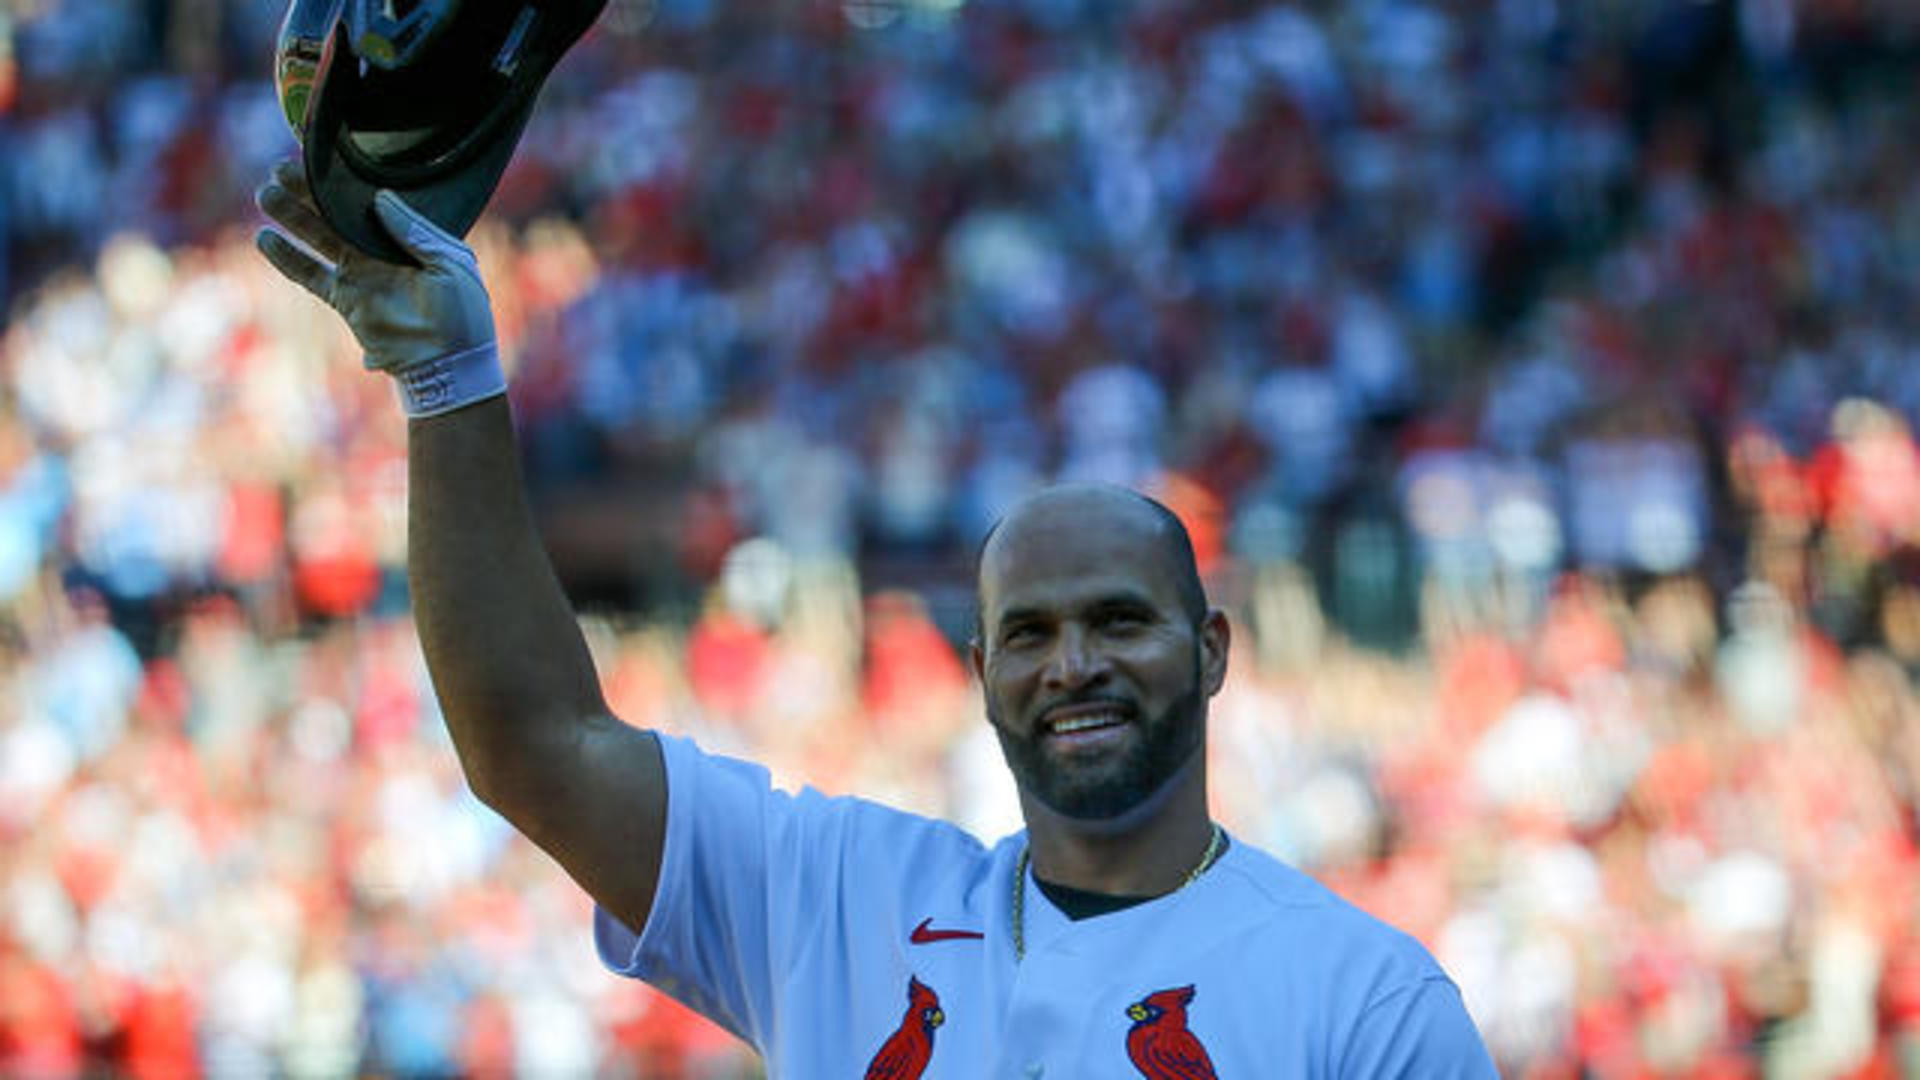 MLB Legend Albert Pujols Makes a Promise to His Son While